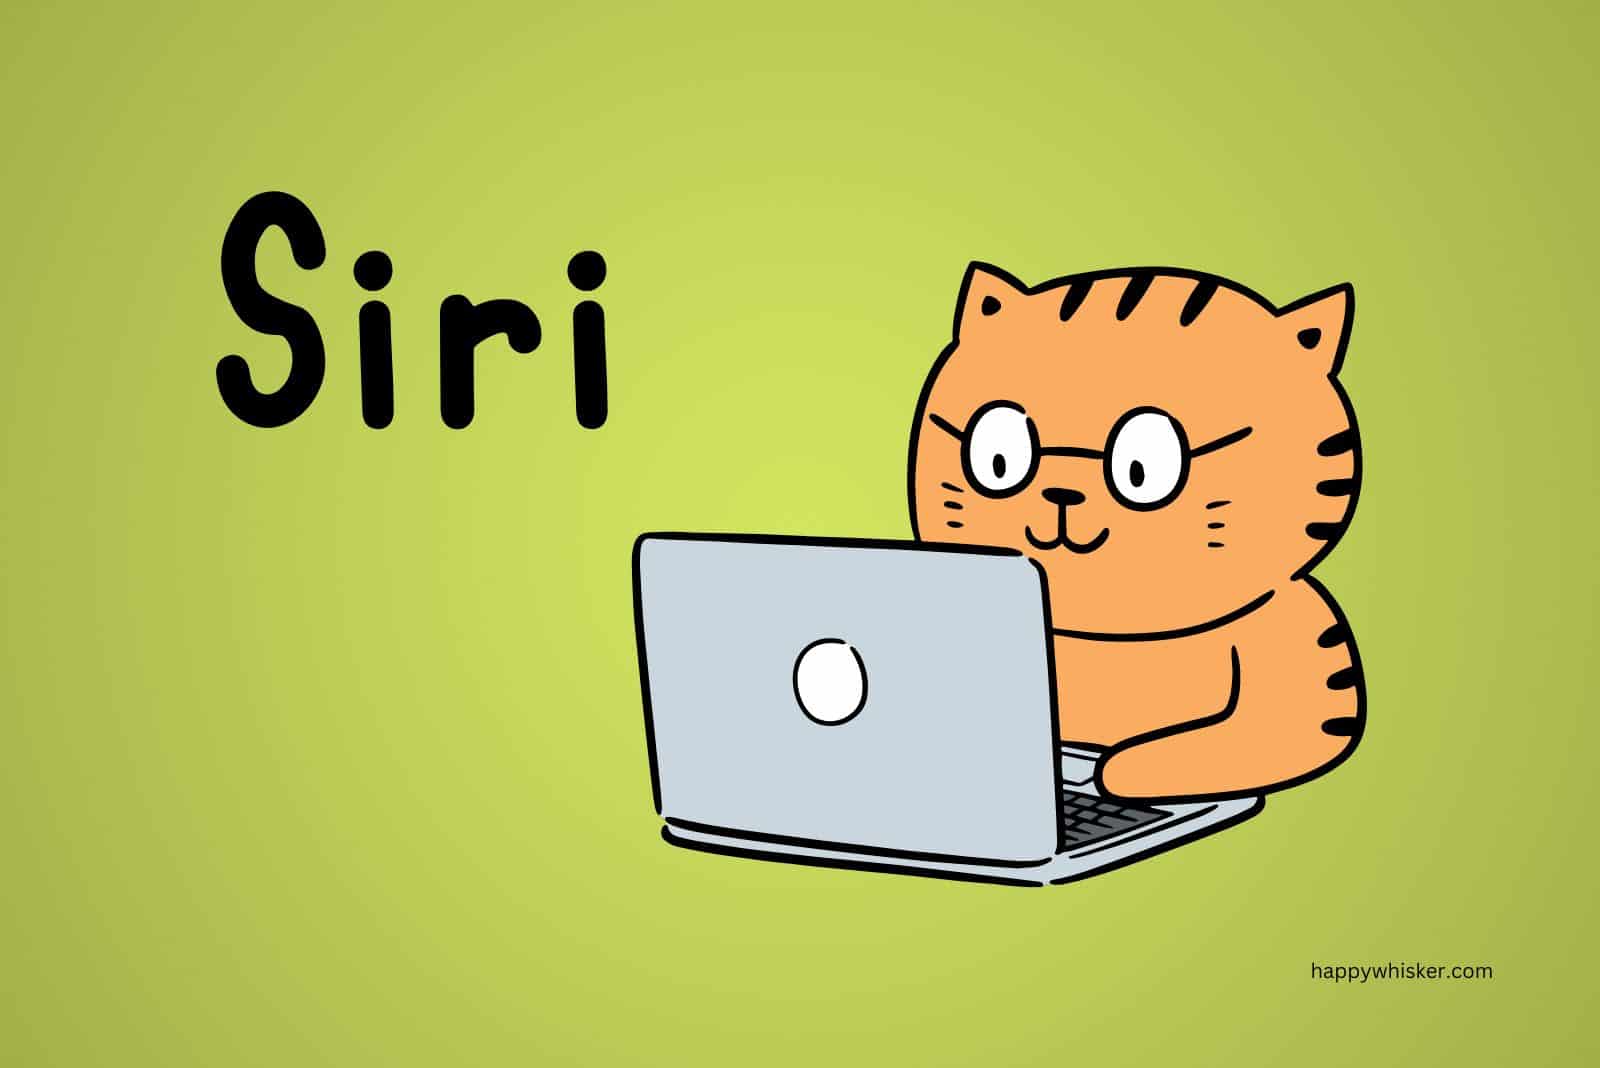 illustration of cat by the laptop with written cat name